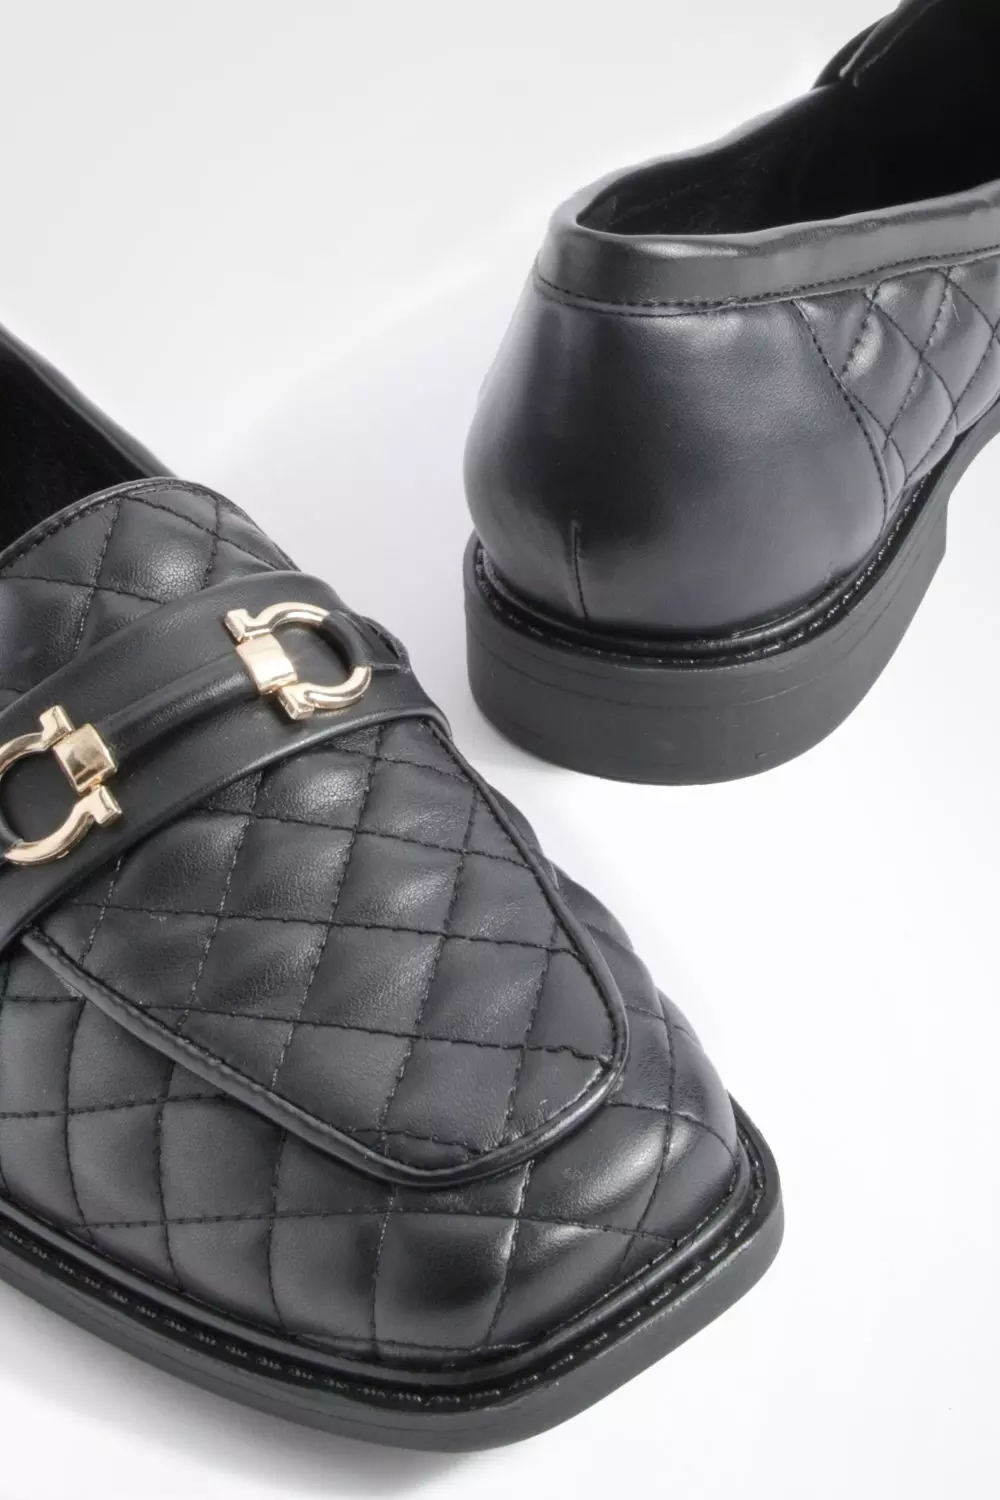 Wide Fit Square Toe Quilted Loafers